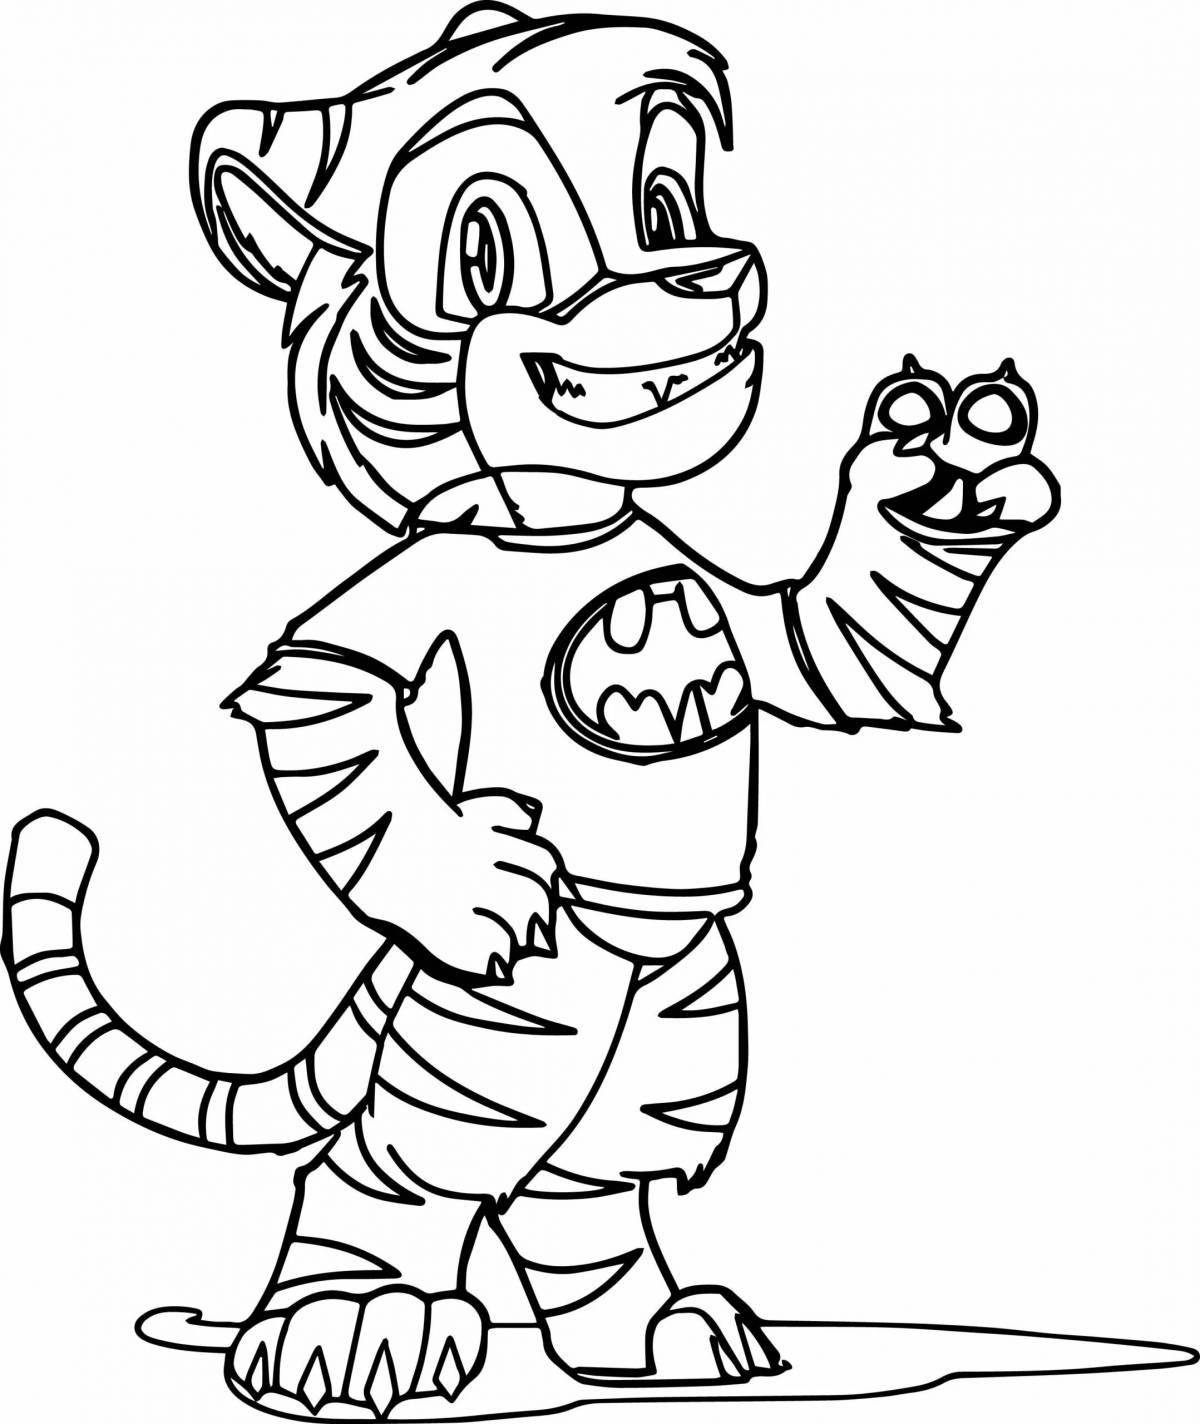 Coloring book nice tiger and lion